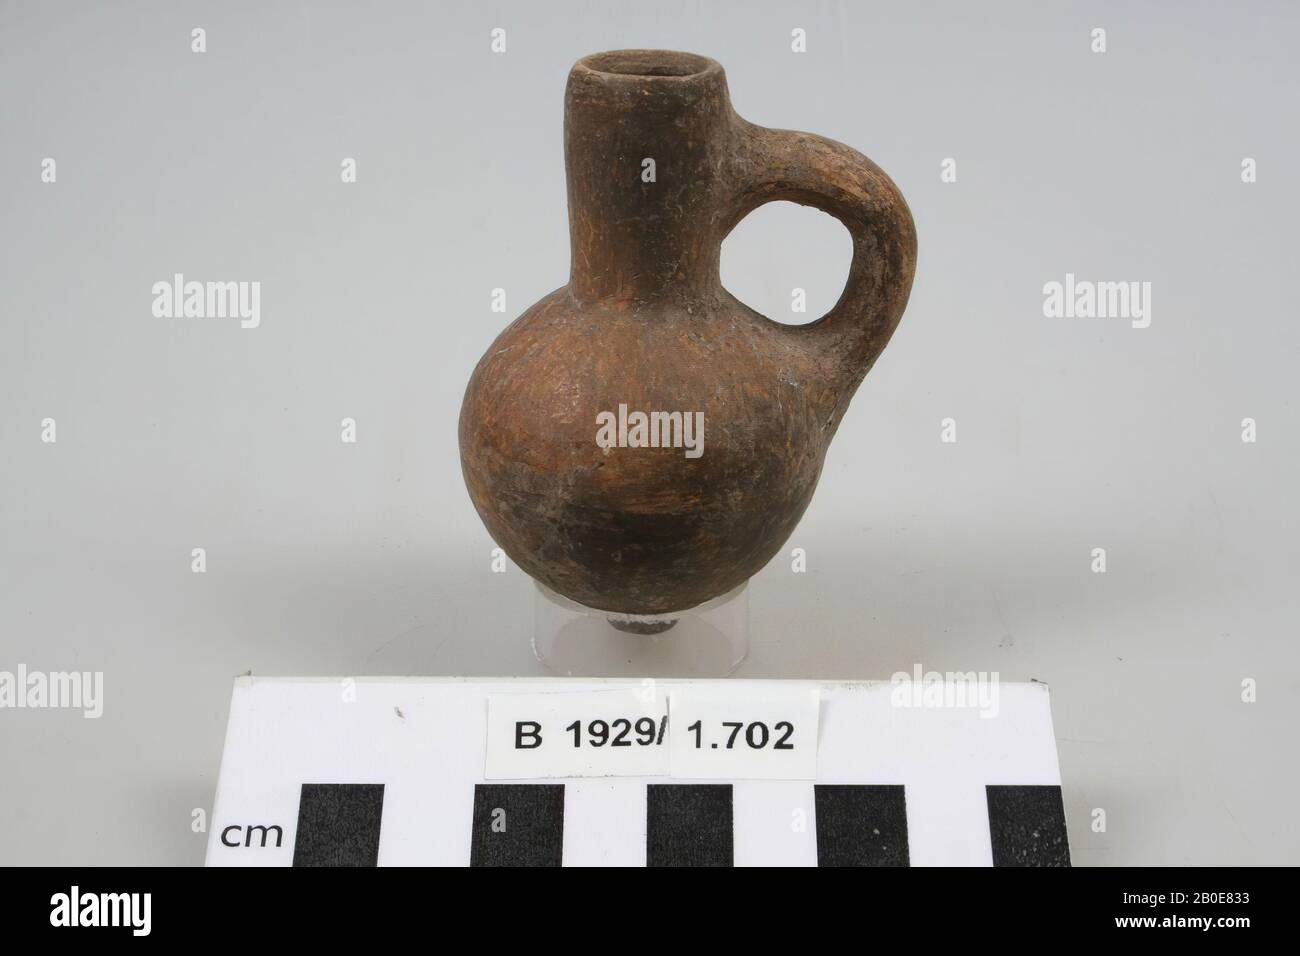 A small earthenware jug with a straight neck, one earpiece and a bulbous body. The object is brown-red slotted, crockery, earthenware, H 7.9 cm, D 4.7 cm, Iron Age II 925-539 BC, Palestine Stock Photo